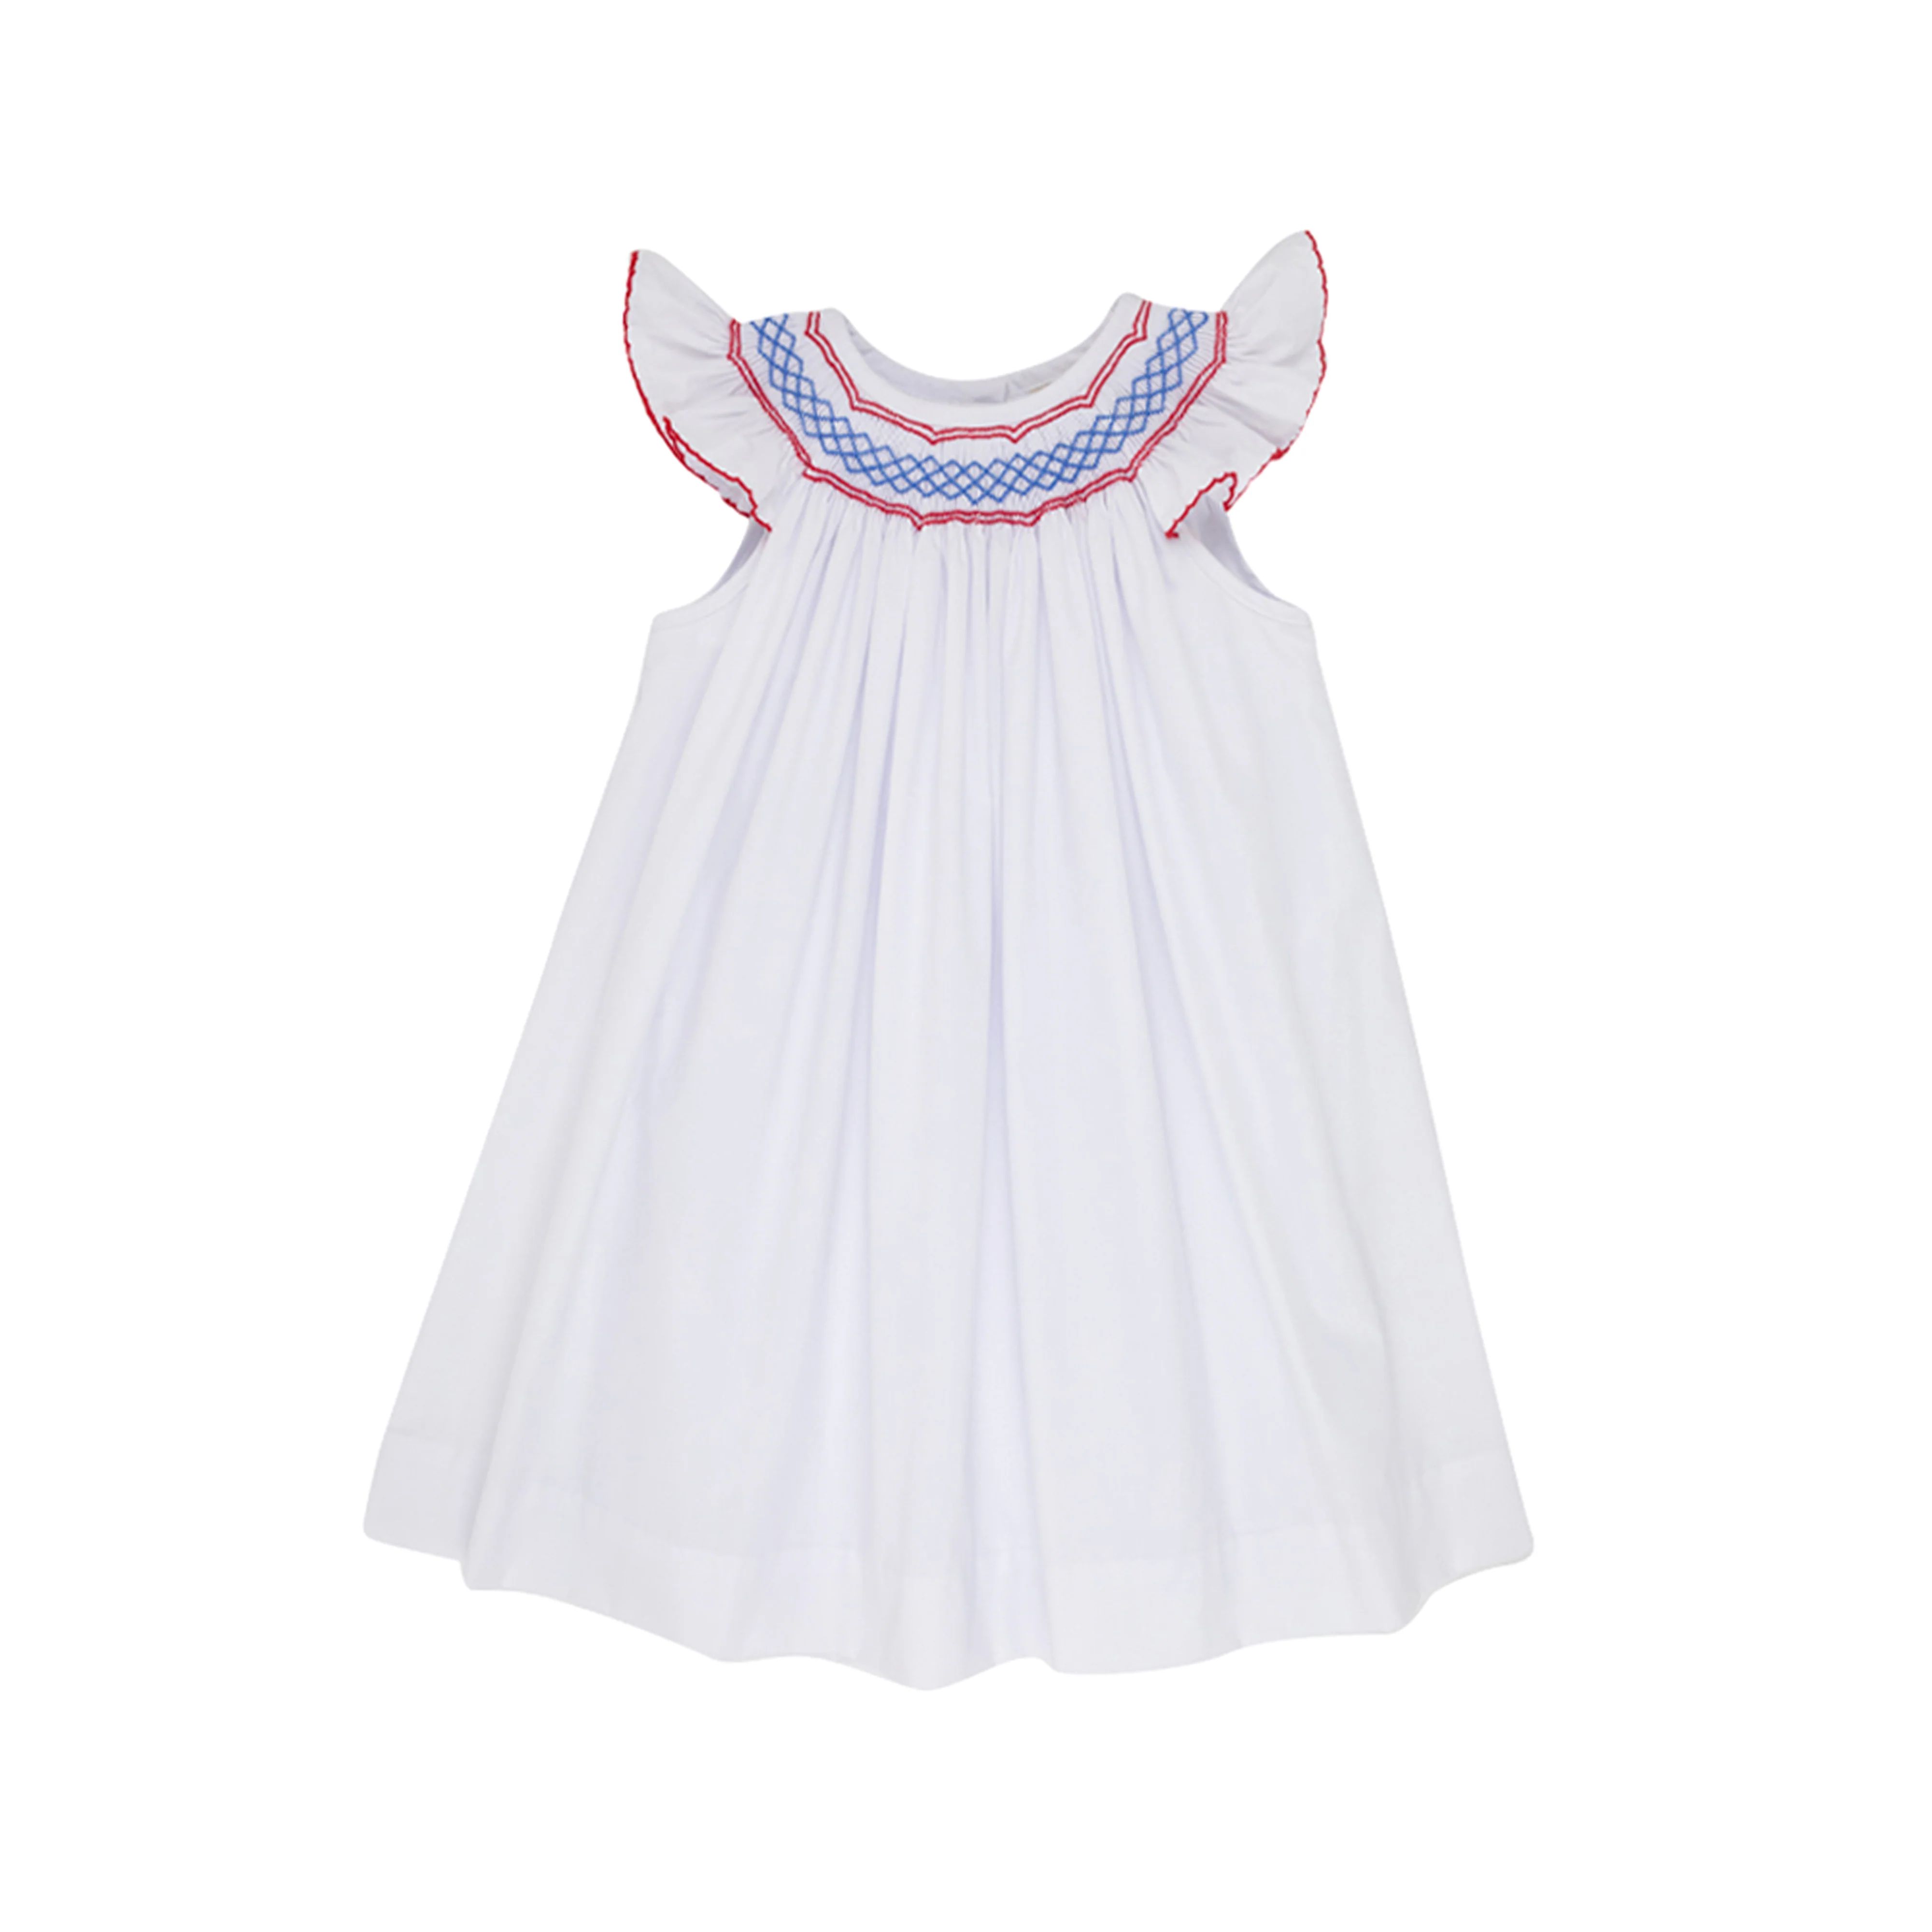 Angel Sleeve Sandy Smocked Dress - Worth Avenue White with Richmond Red & Rockefeller Royal | The Beaufort Bonnet Company